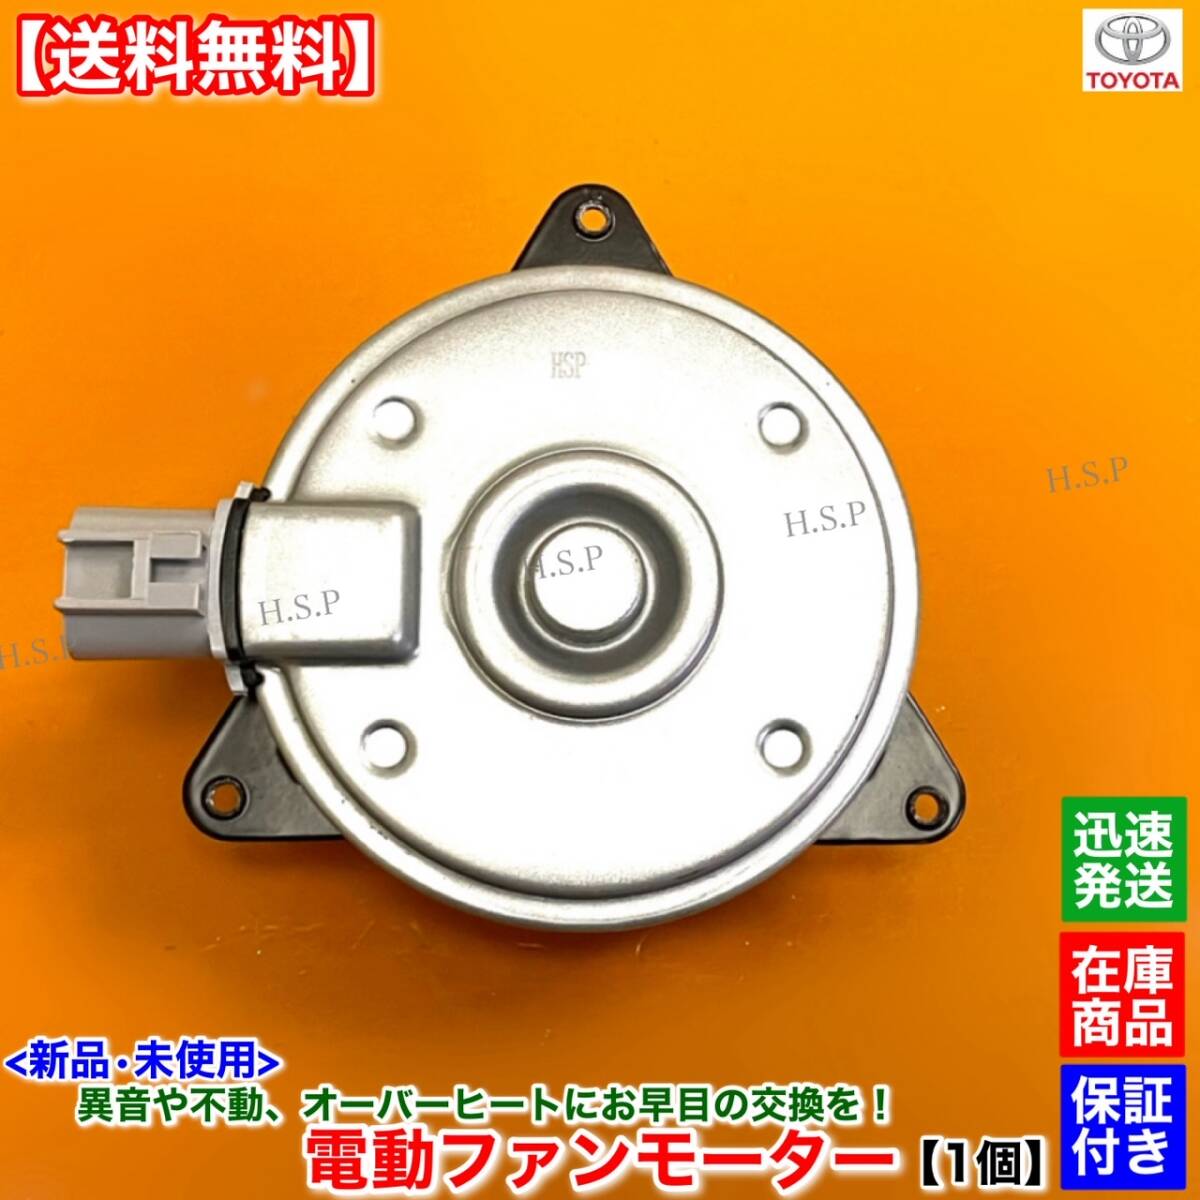 [ free shipping ] new goods electric fan motor [ Ractis NSP120 NSP122 NCP120 NCP122]16363-28150 168000-7280 overheat condenser 